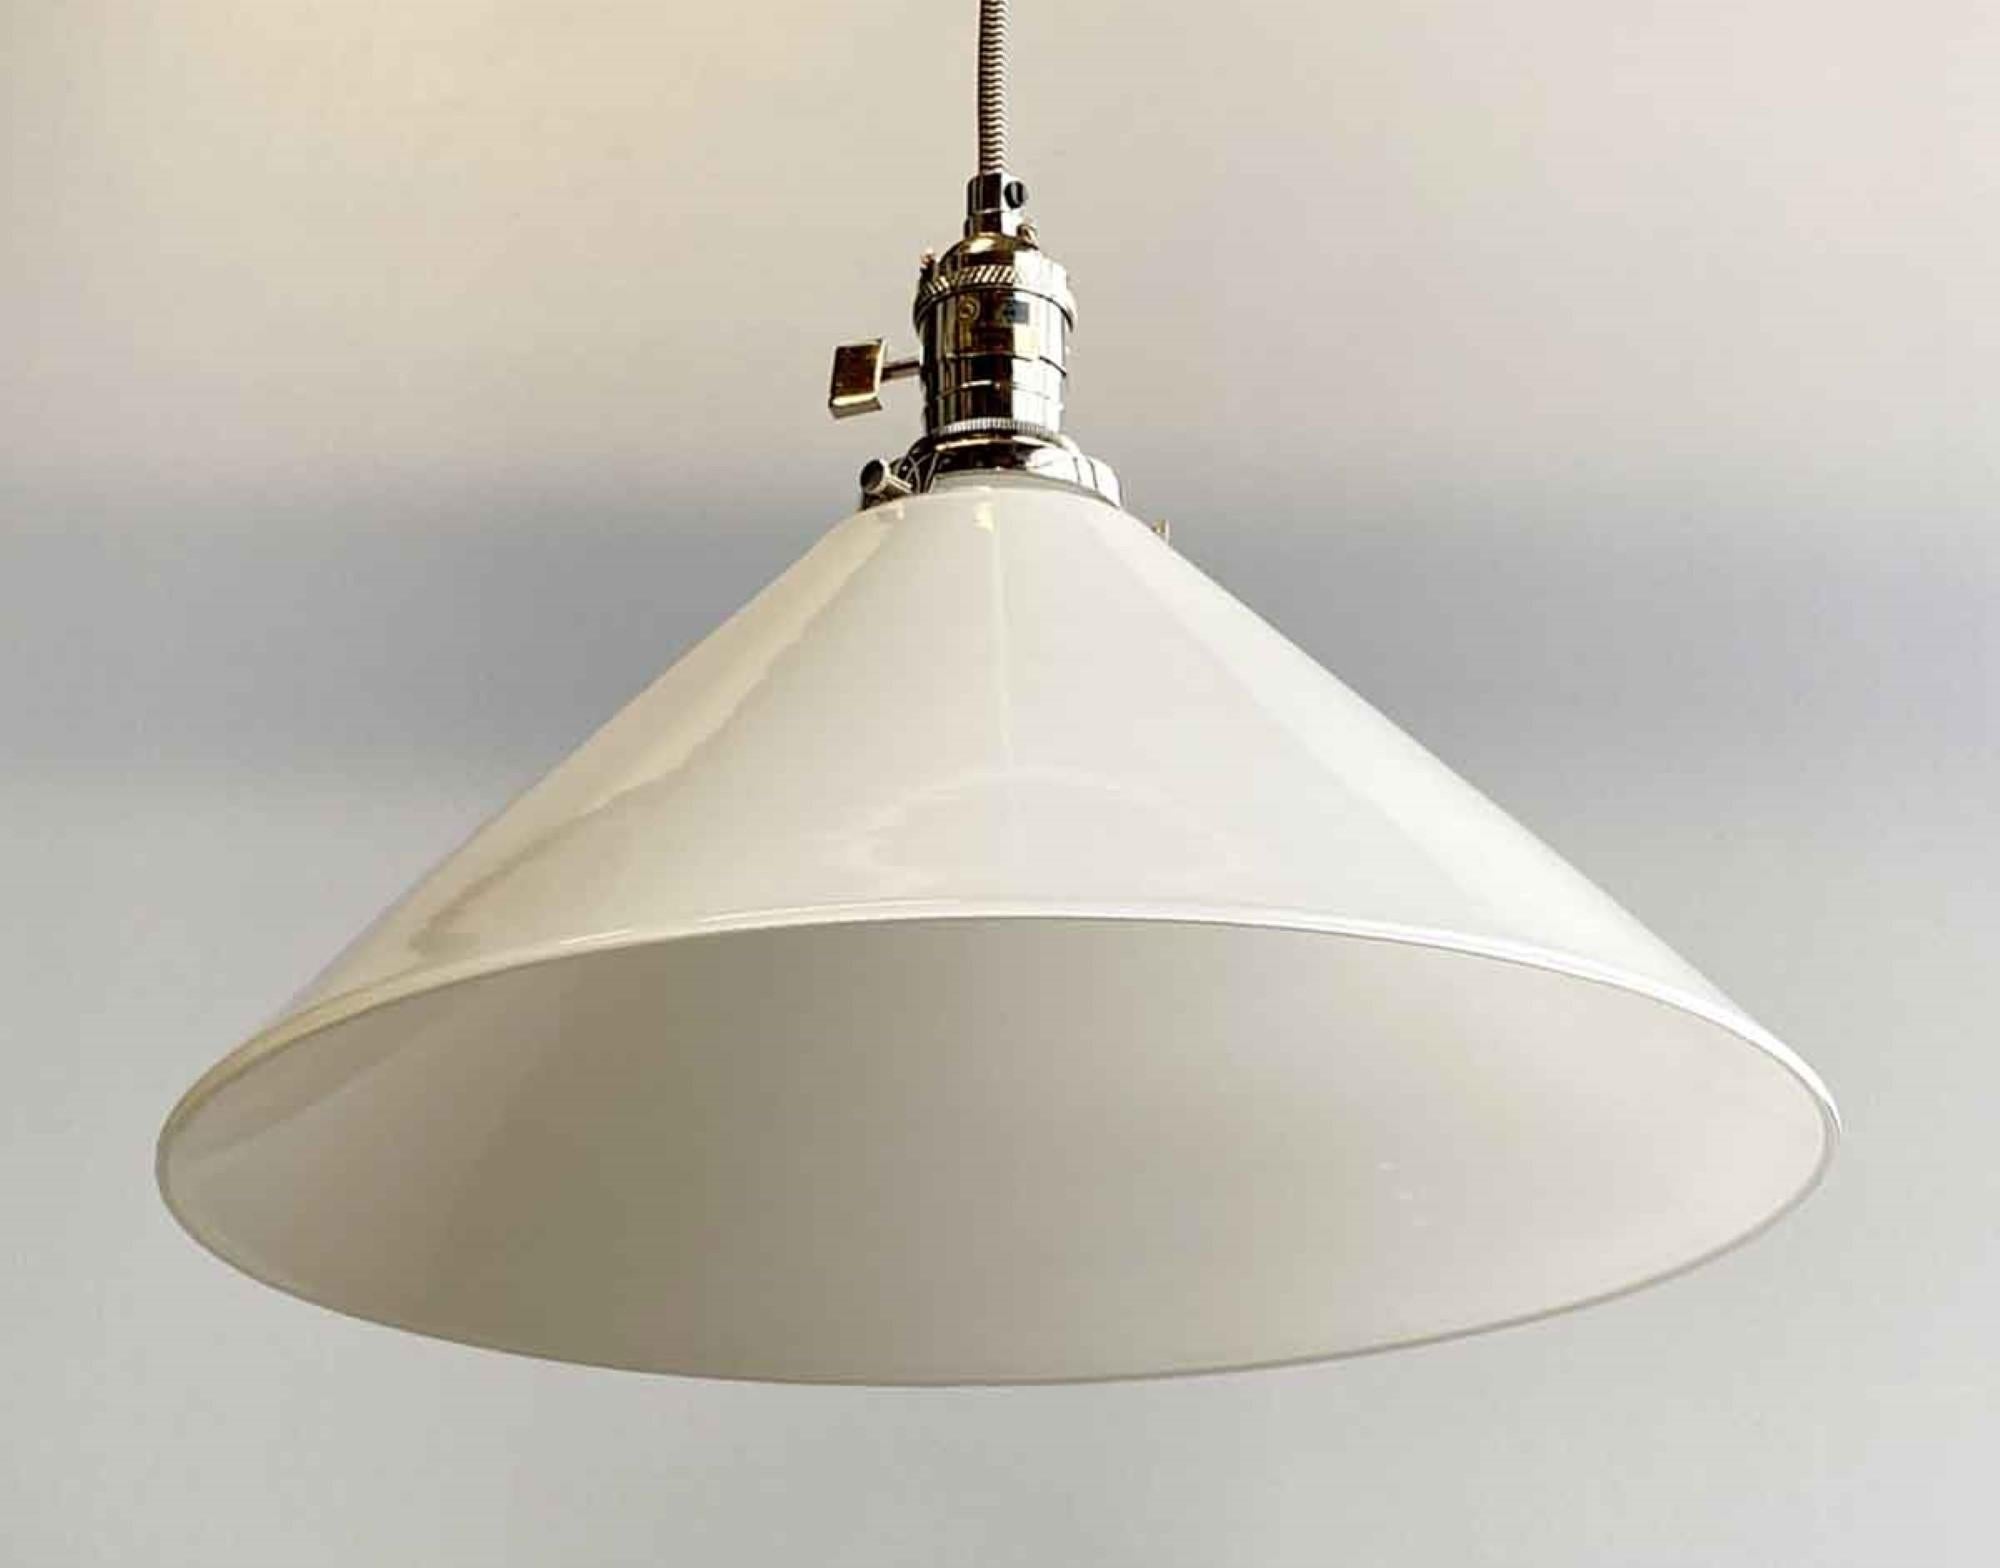 1990s white glass cone glass shade pendant light. Features new polished nickel finish hardware. Cleaned and rewired. Please note, this item is located in one of our NYC locations.